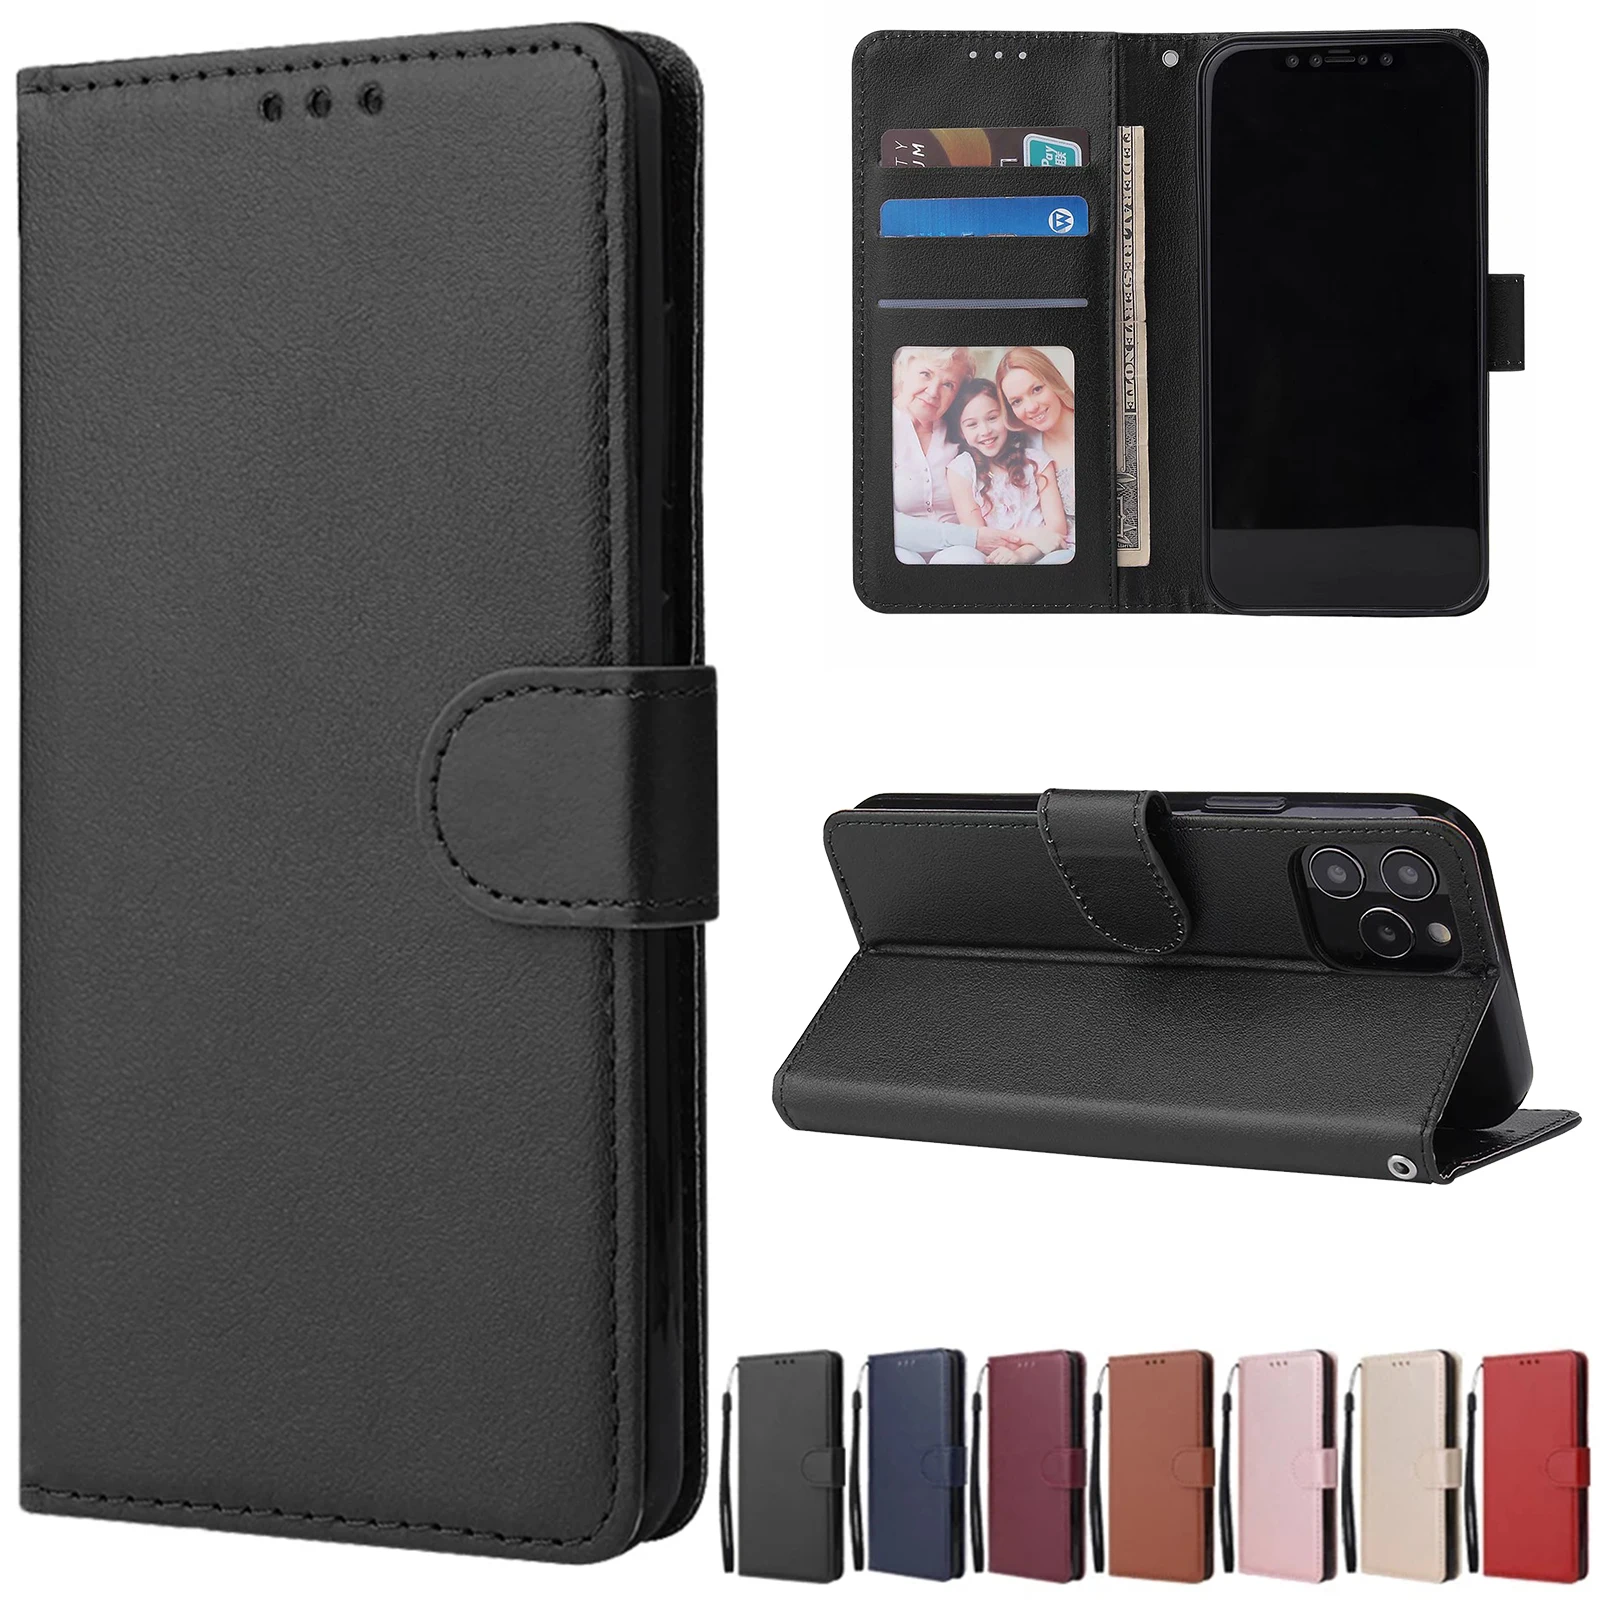 

Leather Case Protect Cover For iPhone 13 12 Mini 11 Pro Max X XR XS Max 7 8 6 6s Plus 5 5s SE 2020 Stand Coque Flip Wallet Funda